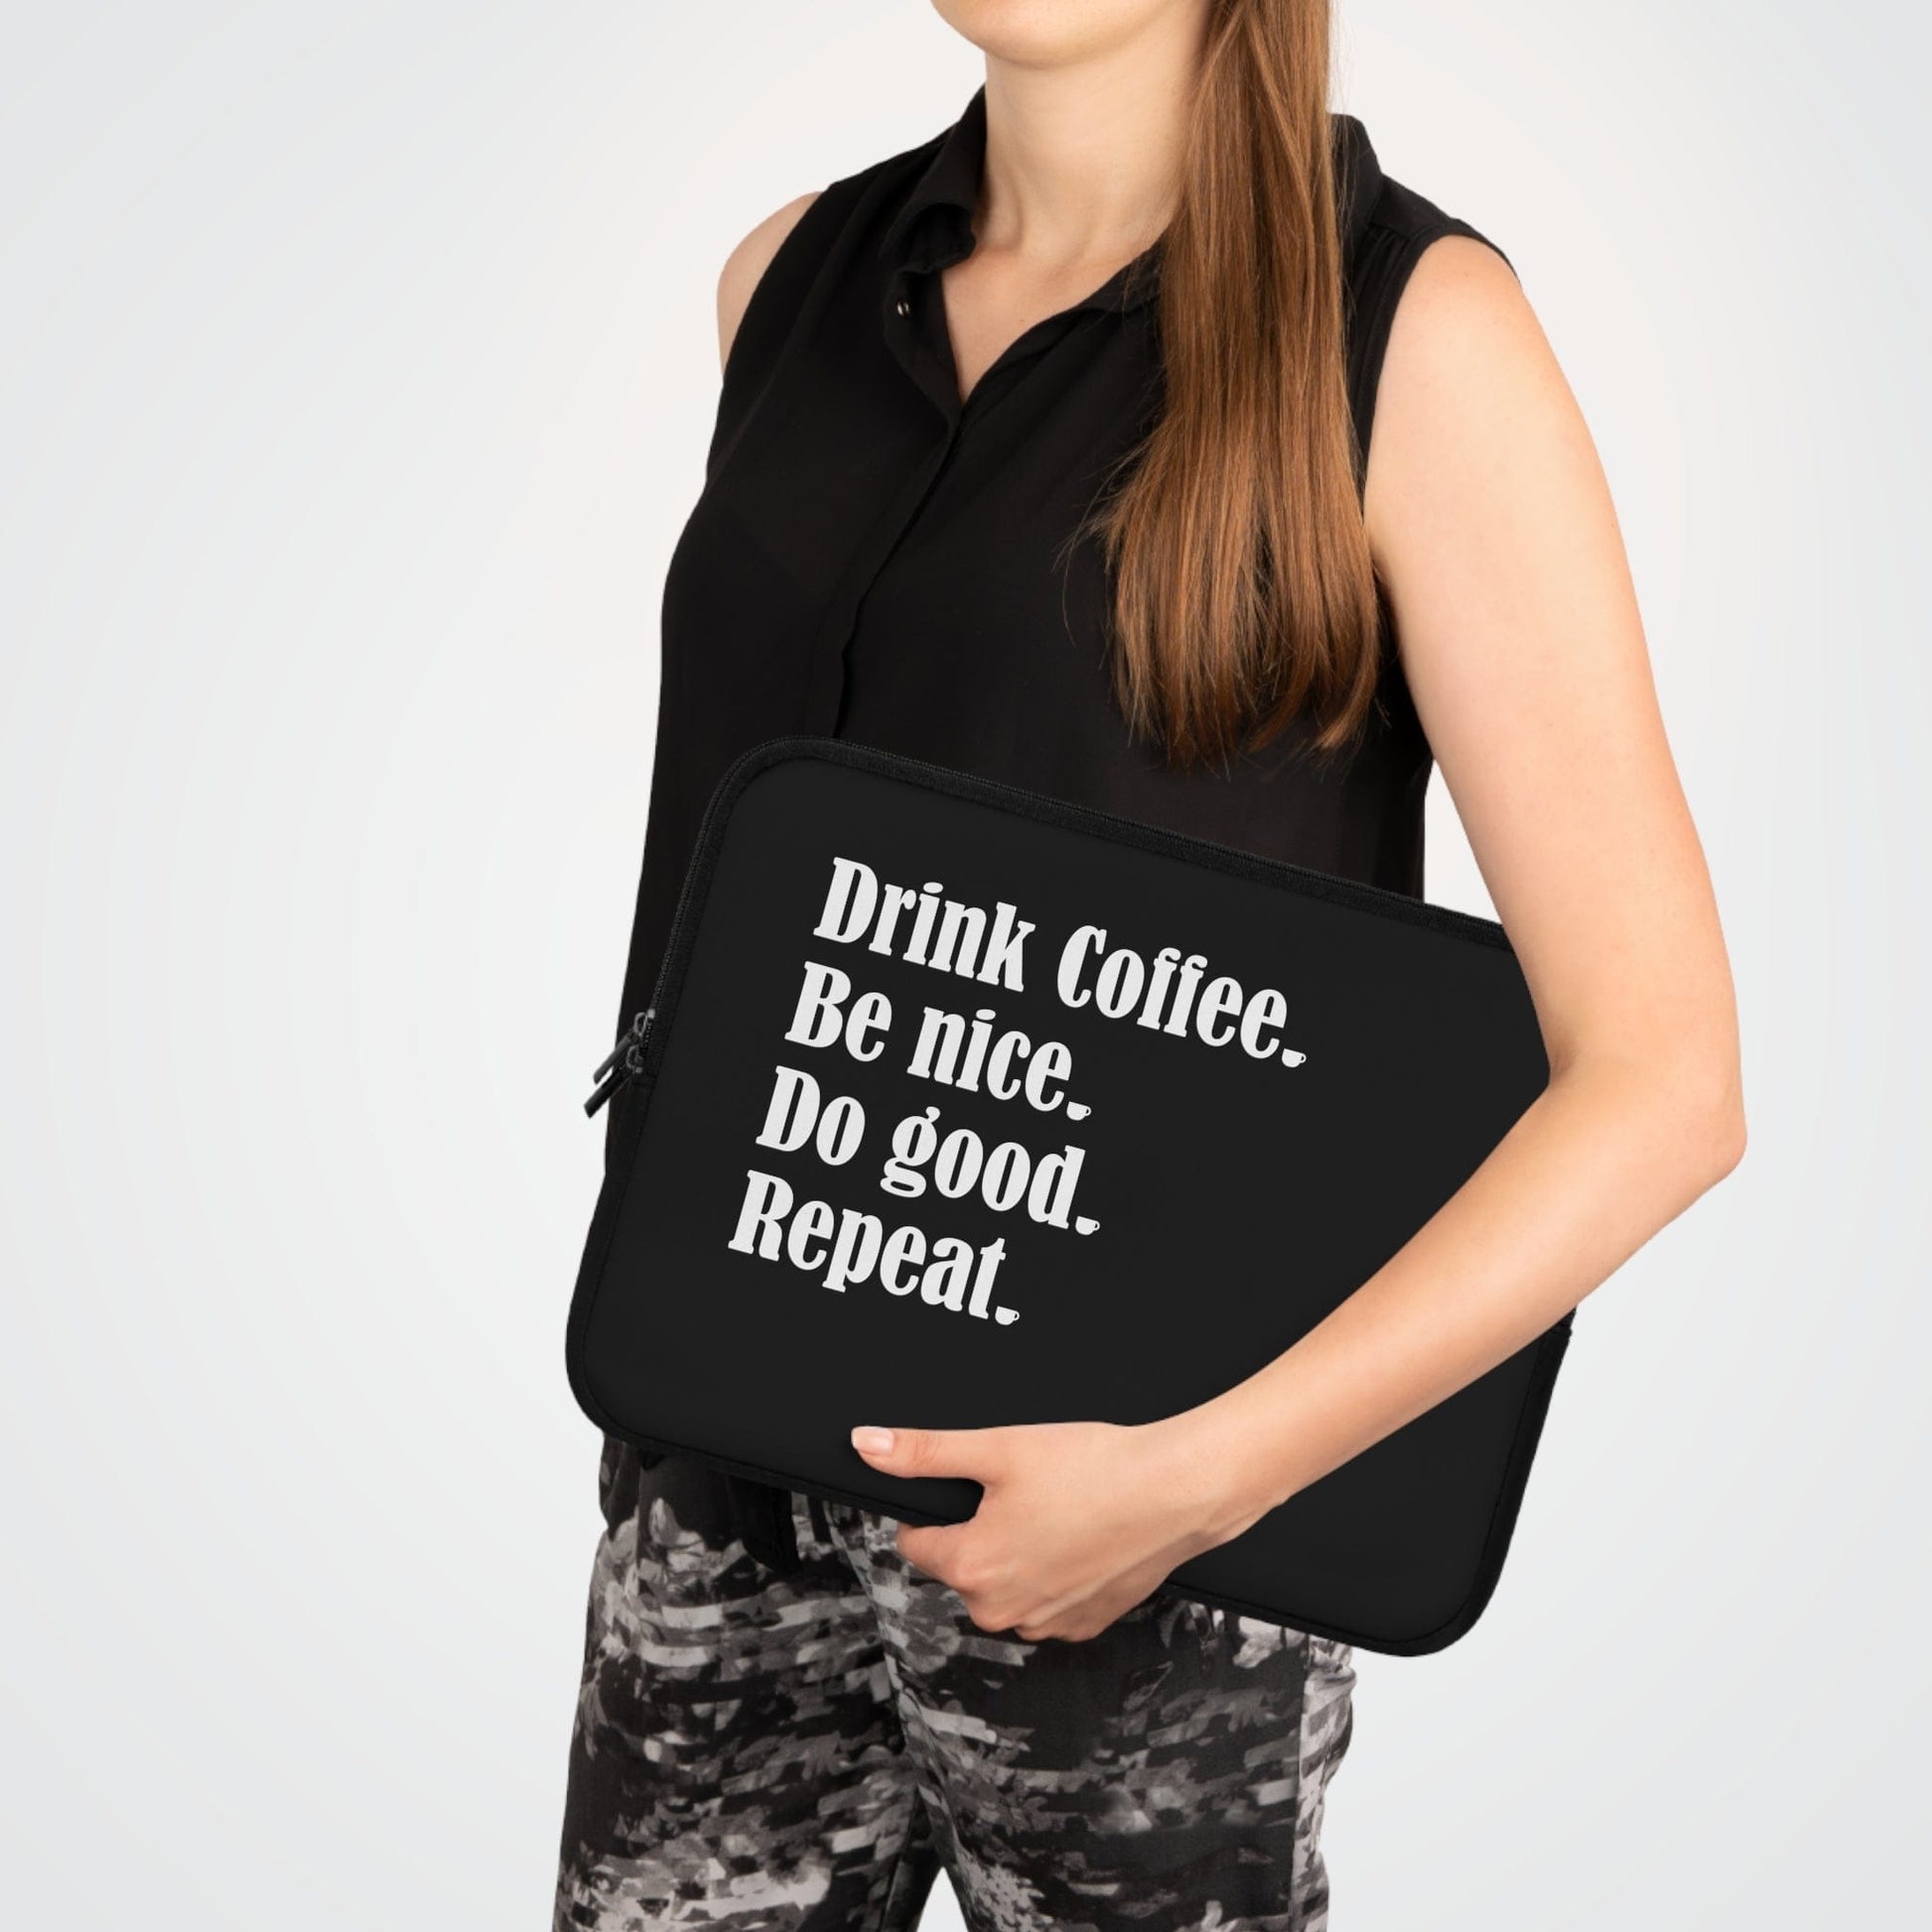 Good Bean Gifts "Drink Coffee, Be Nice, Do Good, Repeat" Laptop Sleeve